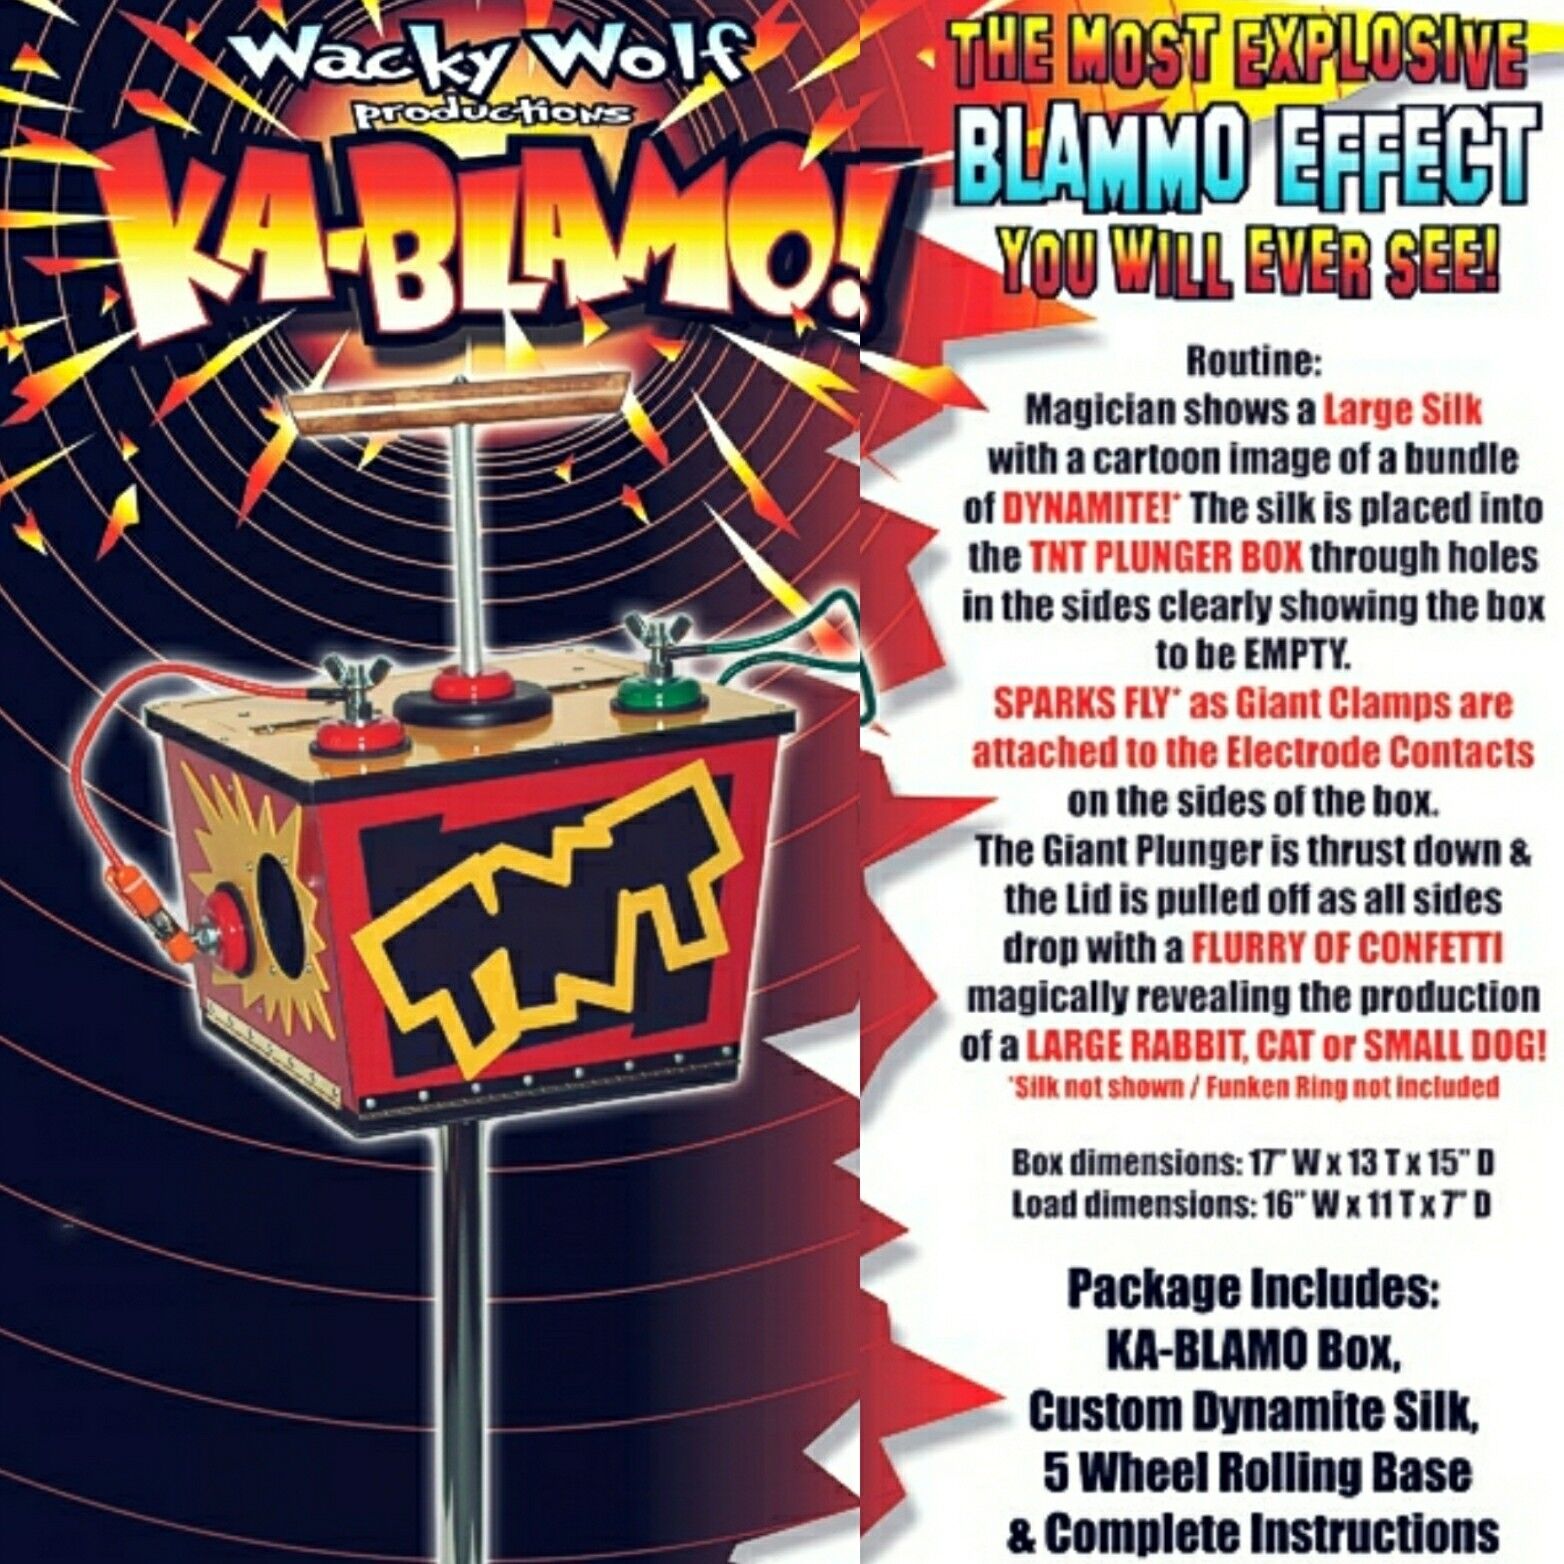 Wolfs Magic - Ka-Blammo  #3 of 18  - only 18 ever made and this is #3 - VeryRare